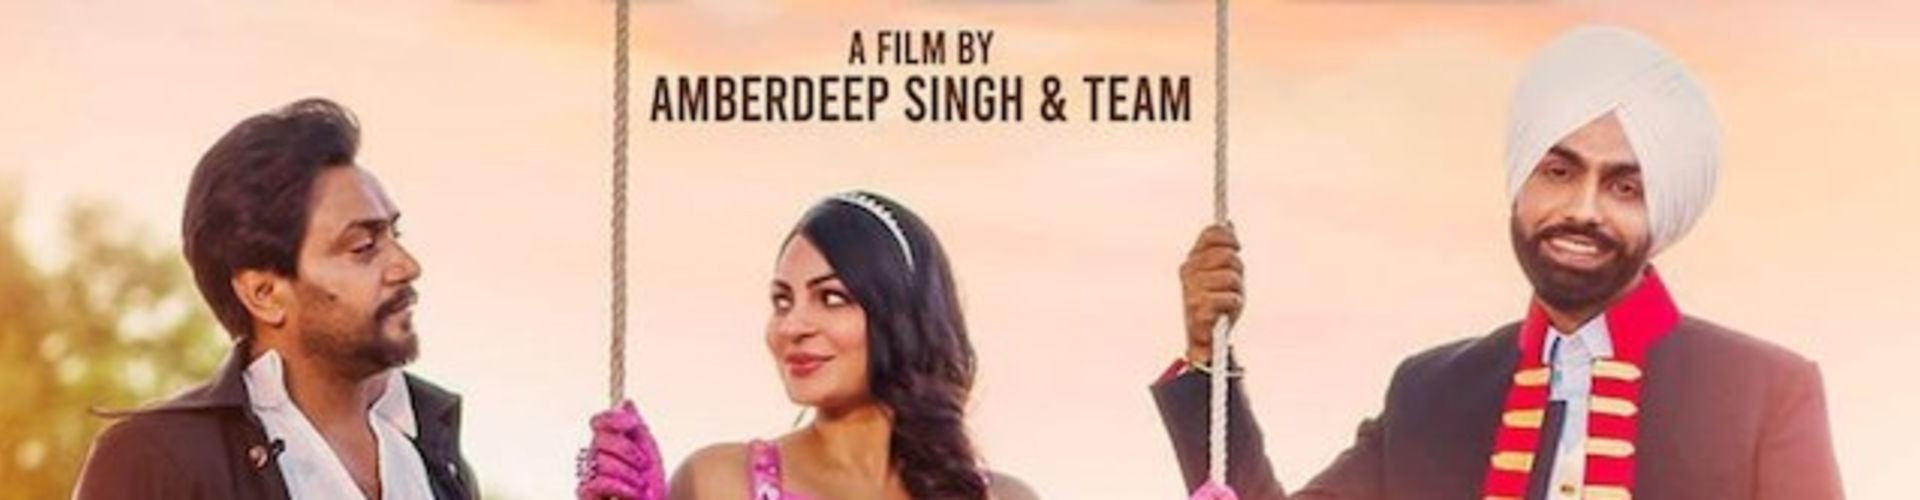 Laung Laachi 2 Teaser Is Out, Starring Neeru Bajwa, Ammy Virk And Amberdeep Singh